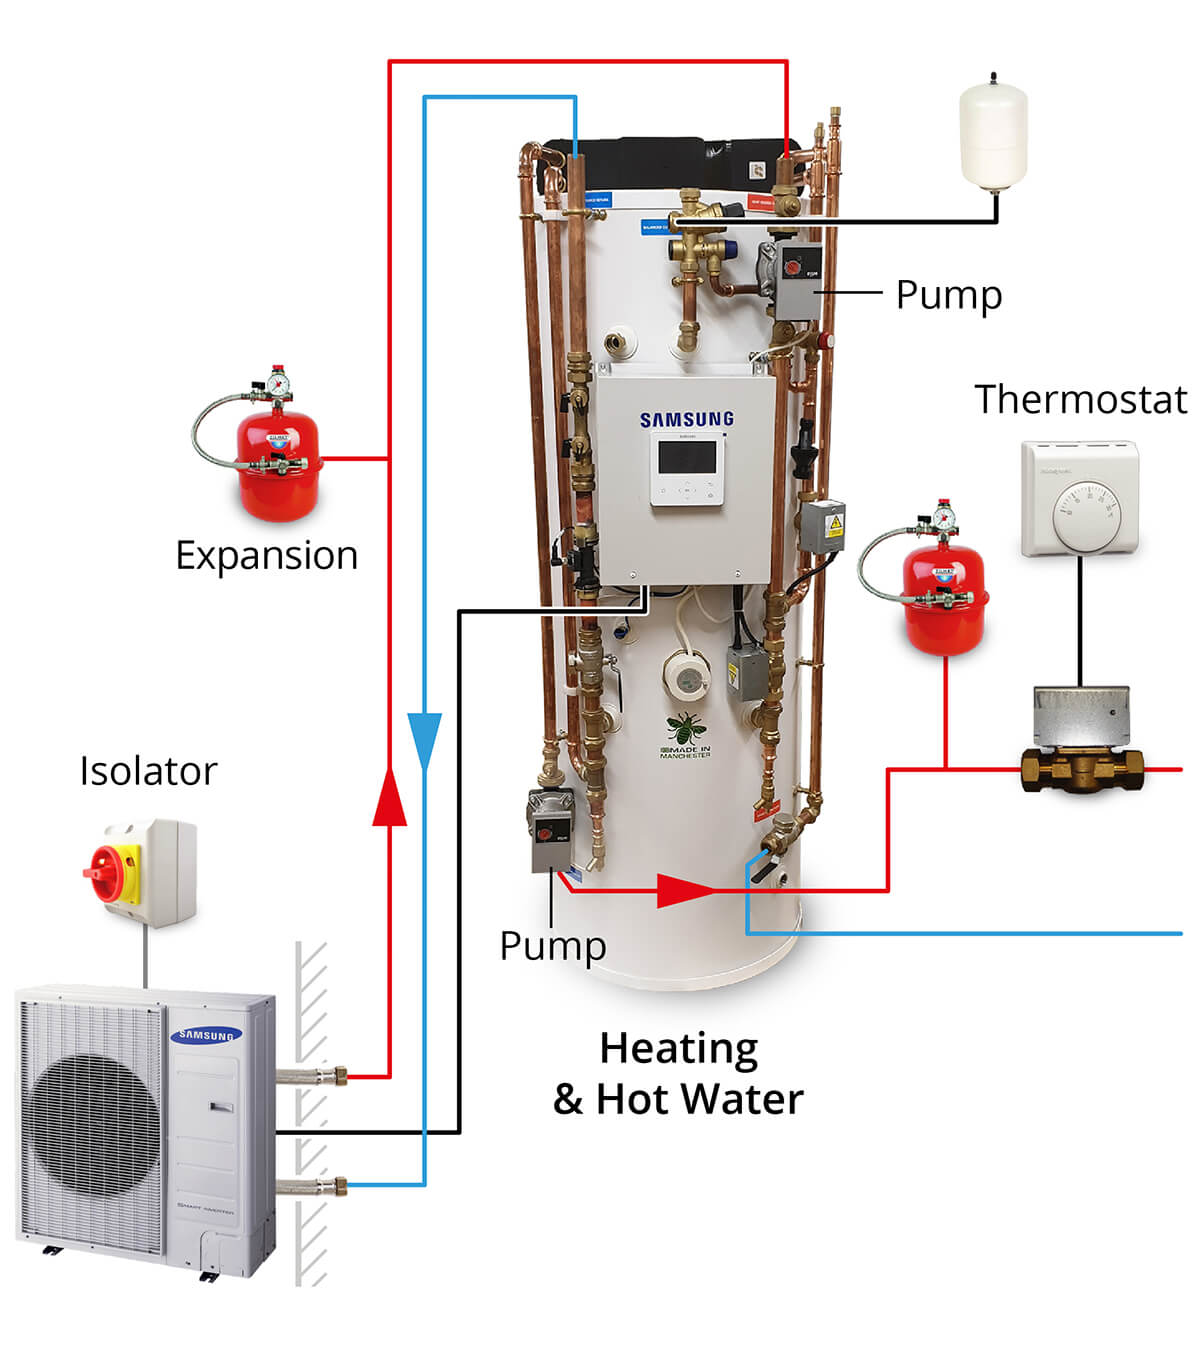 How does Air Conditioning & Heating Work together?